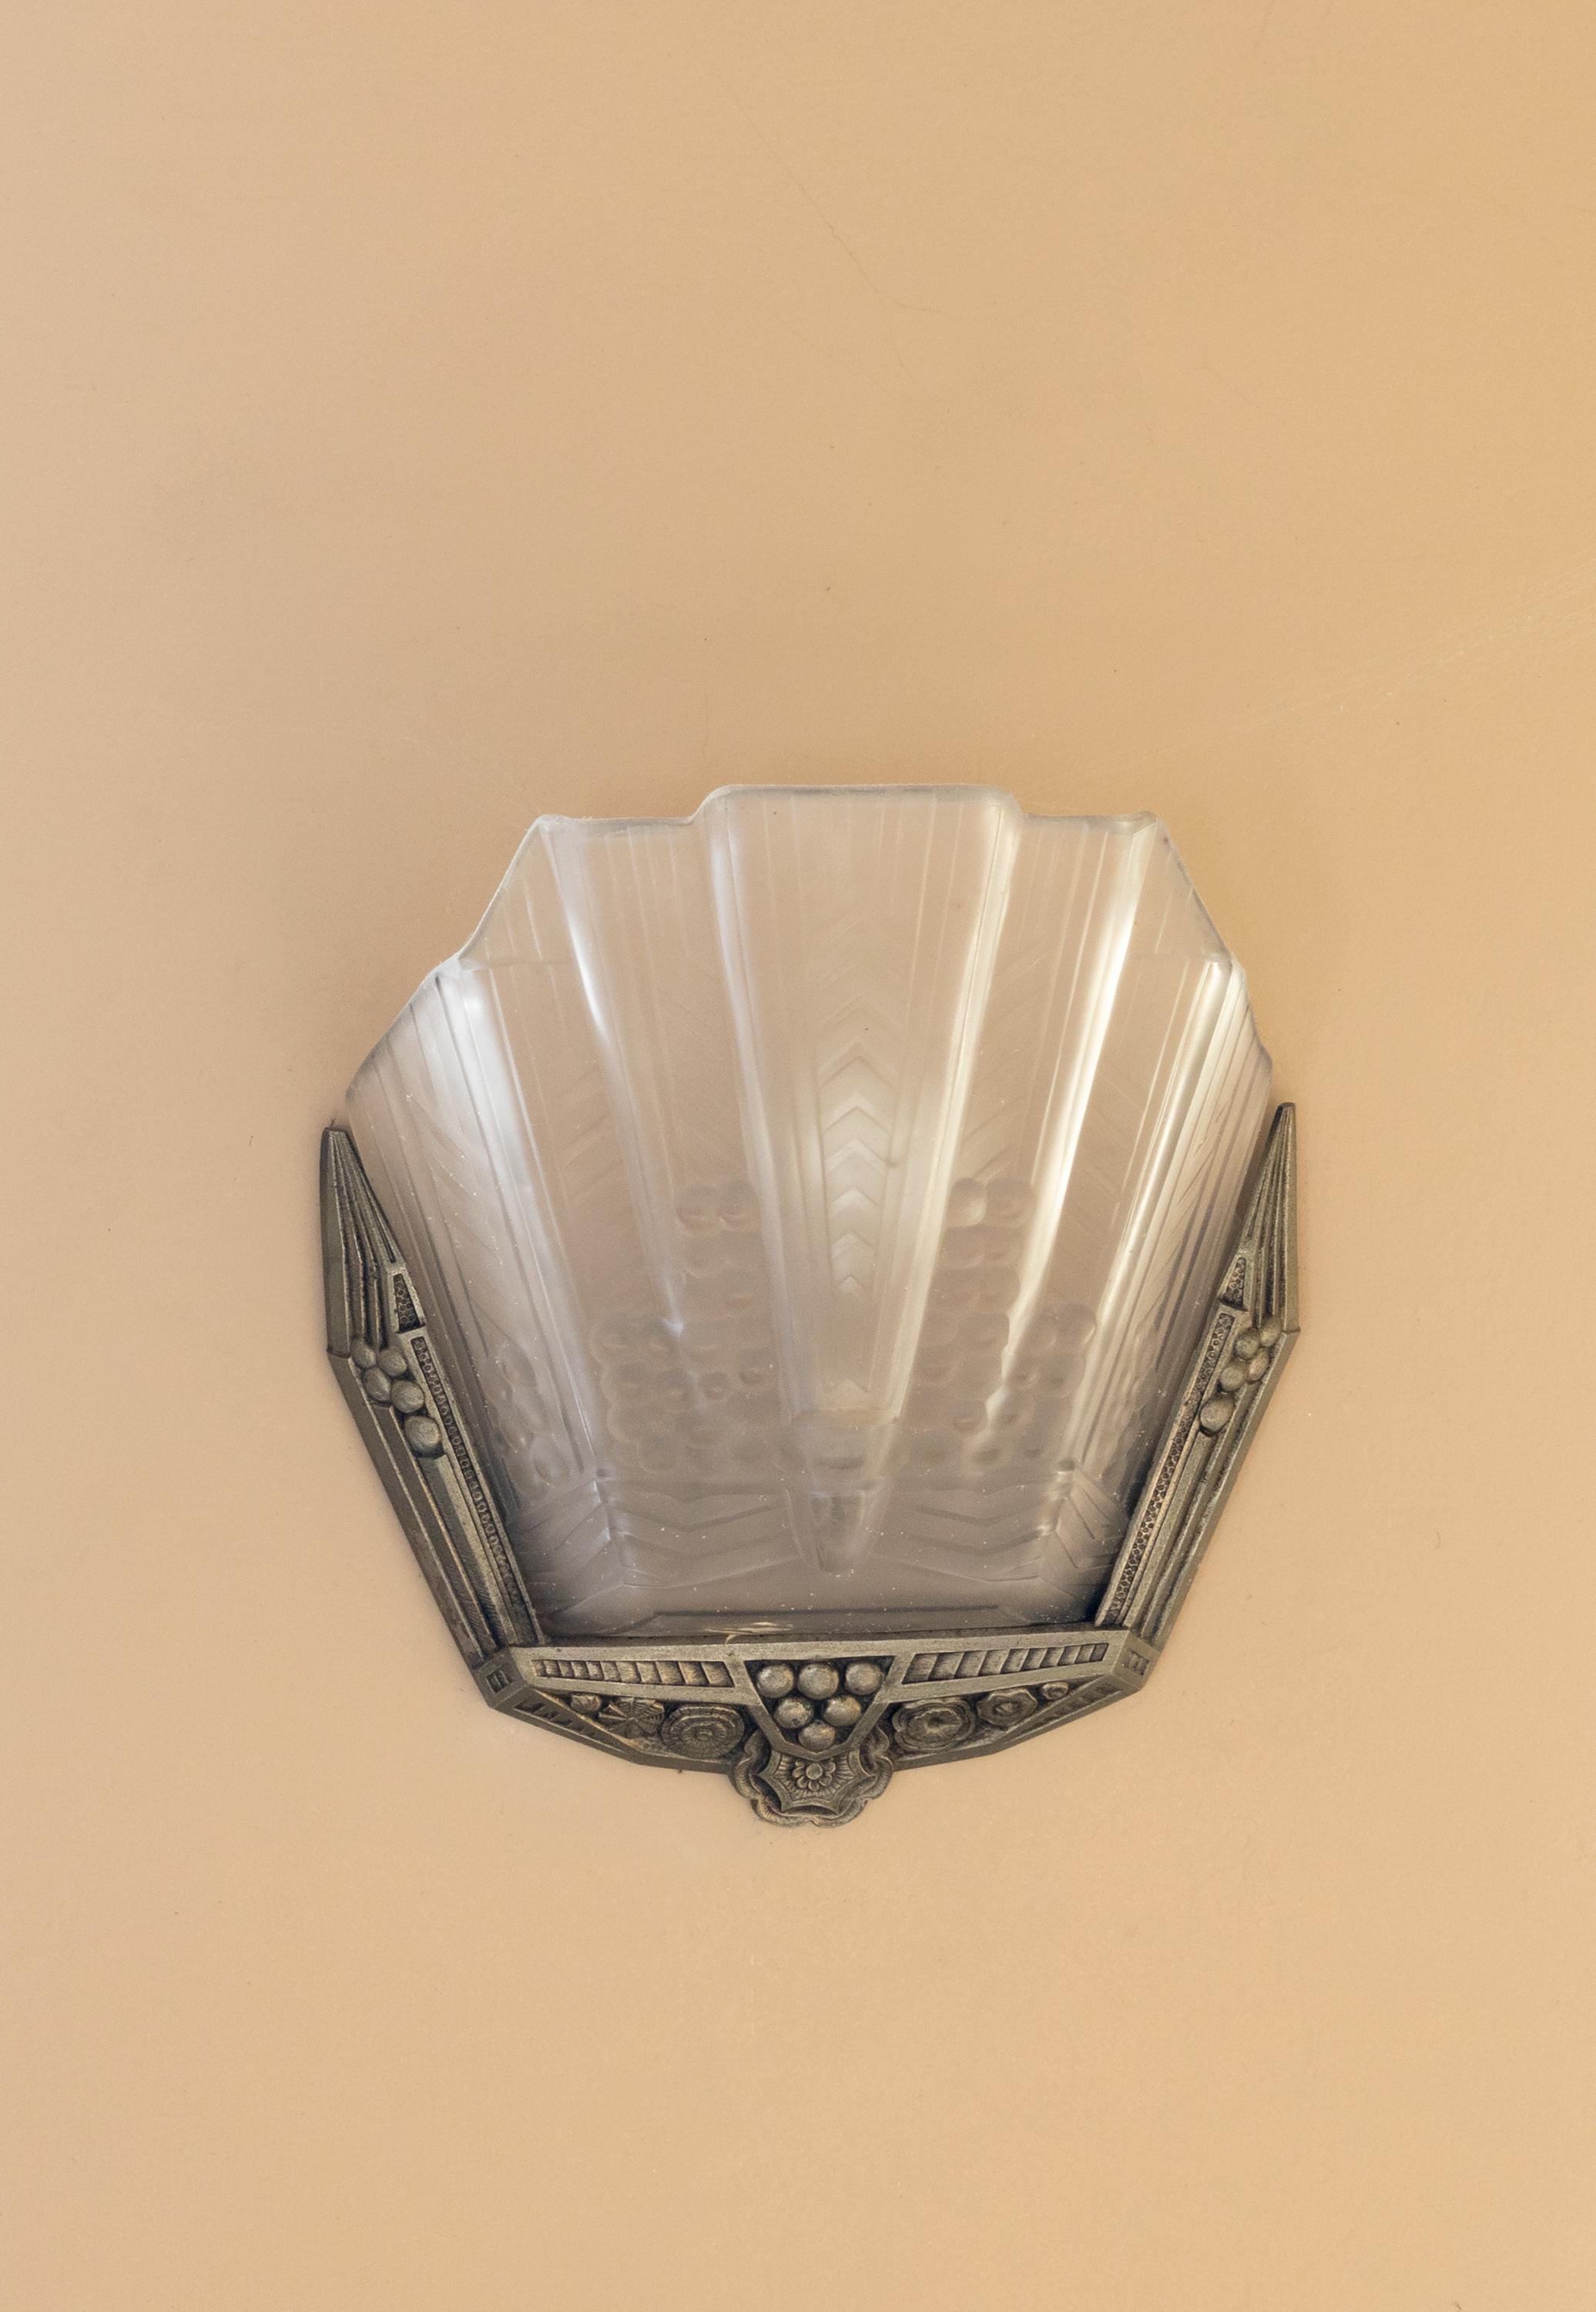 French Art Deco wall sconce by Jean GAUTHIER (Ezanville, Paris), France, 1920s in solid nickel-plated brass holding a frosted pressed glass panel. Unsigned. 
 
Jean Gauthier had his first workshop at 12-14 rue Jean Robert in Paris and later expended